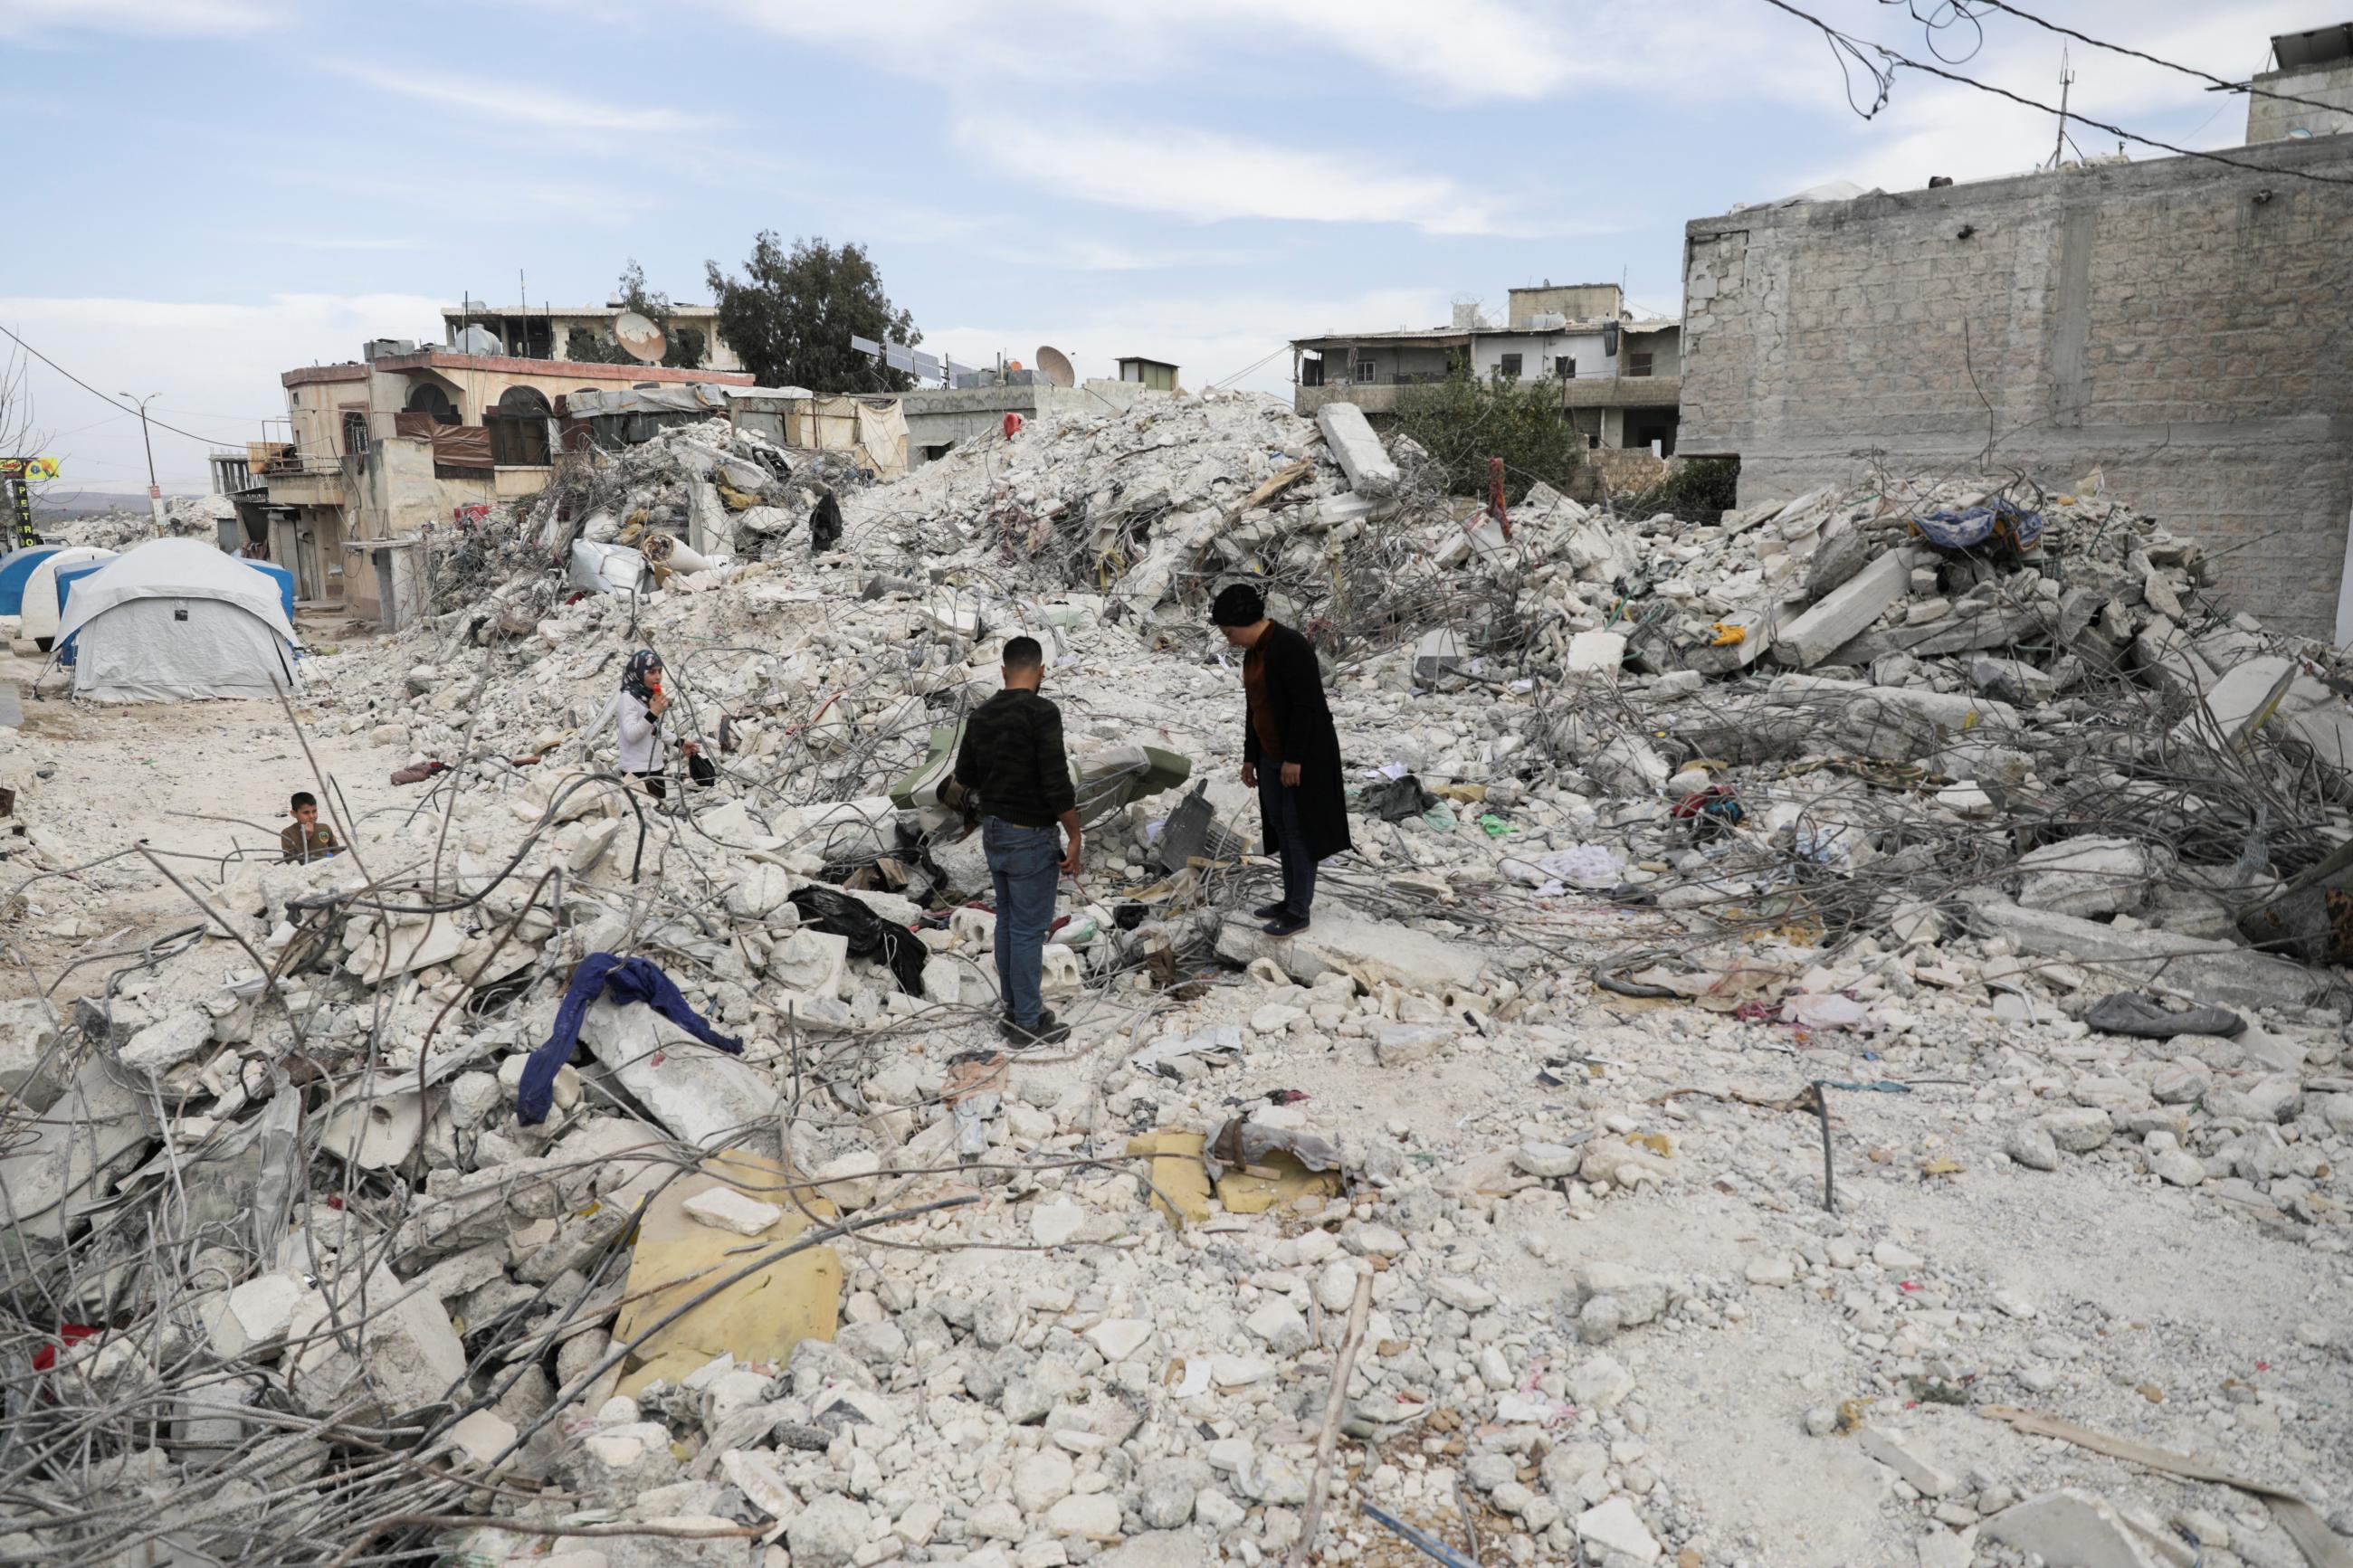 Two men stand on rubble from a building that collapsed in last month's deadly earthquake in the rebel-held town of Jandaris, Syria, on March 12, 2023. 